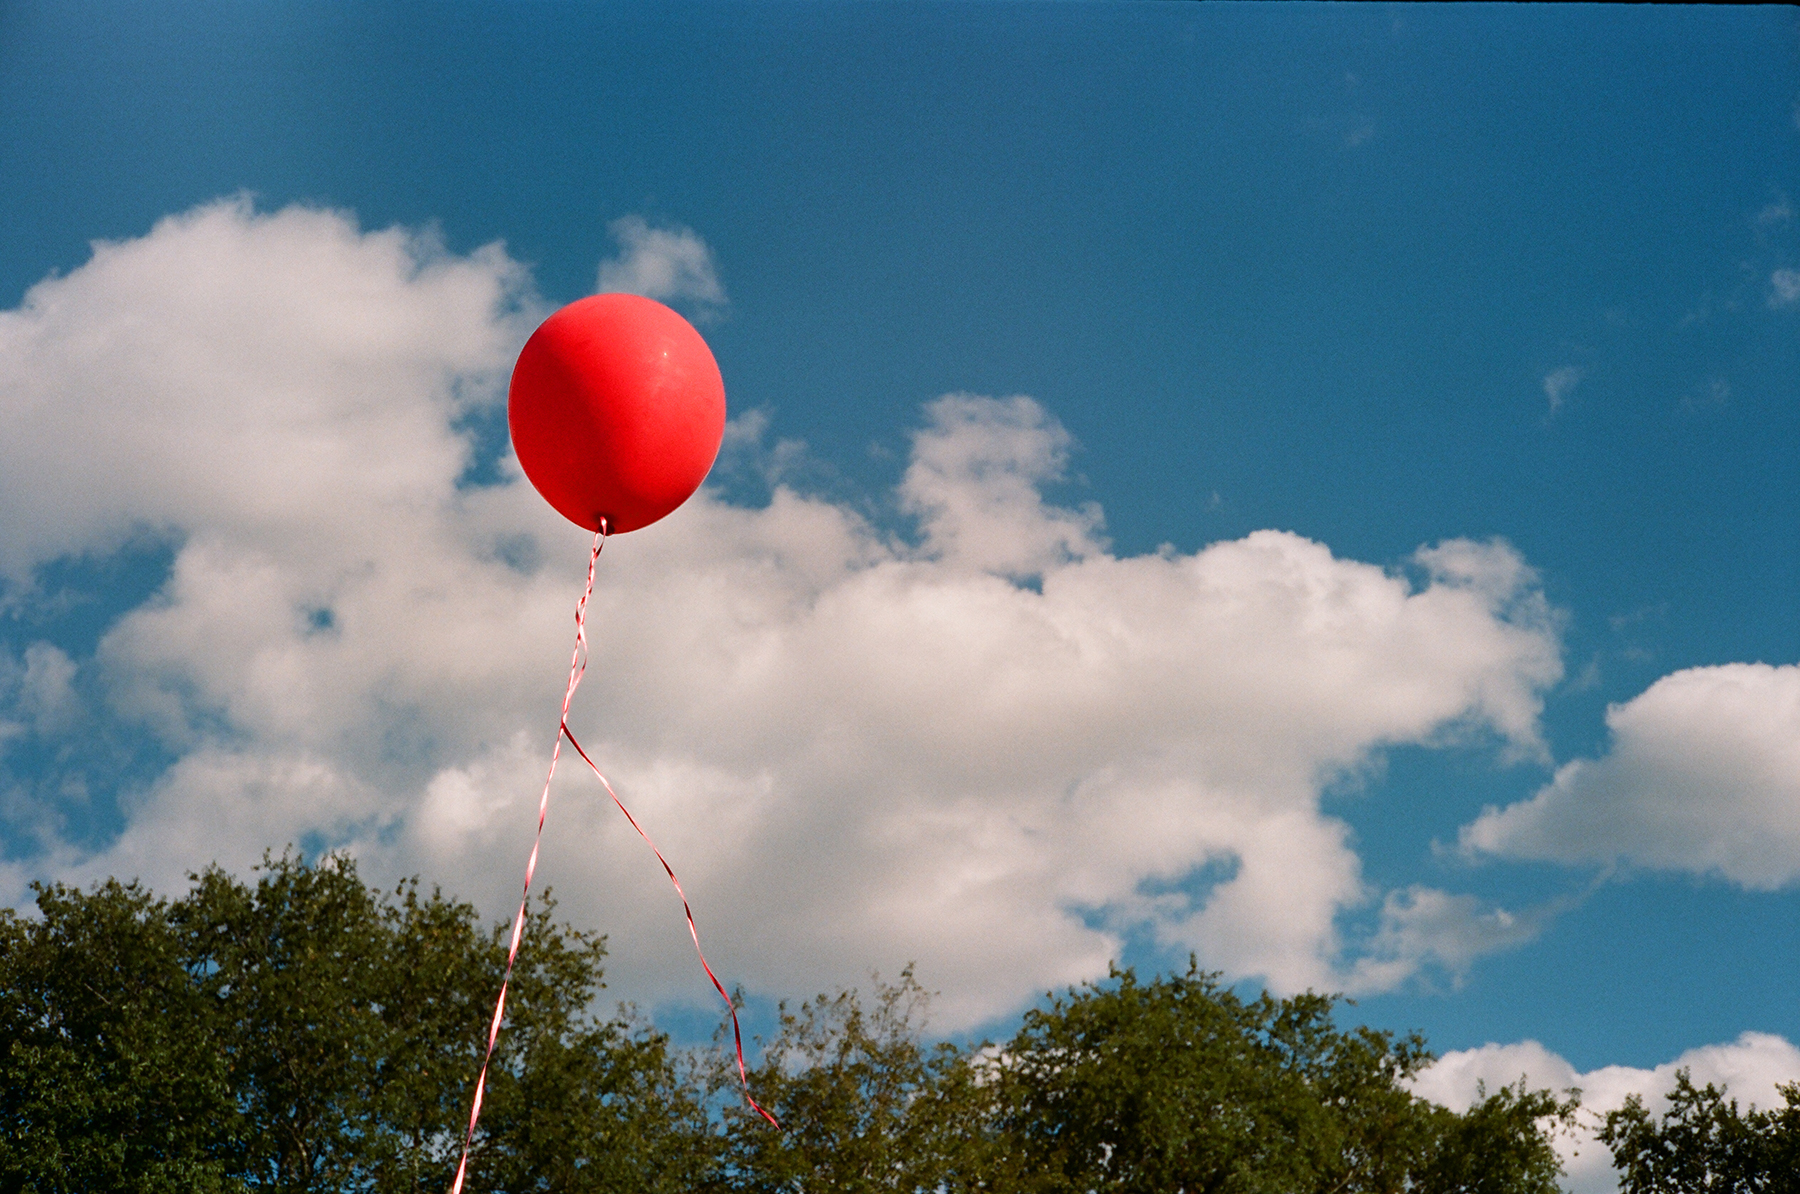 Red Balloon Blue Sky | Yashica Electro 35GS | Portra 160 | Ian Ross